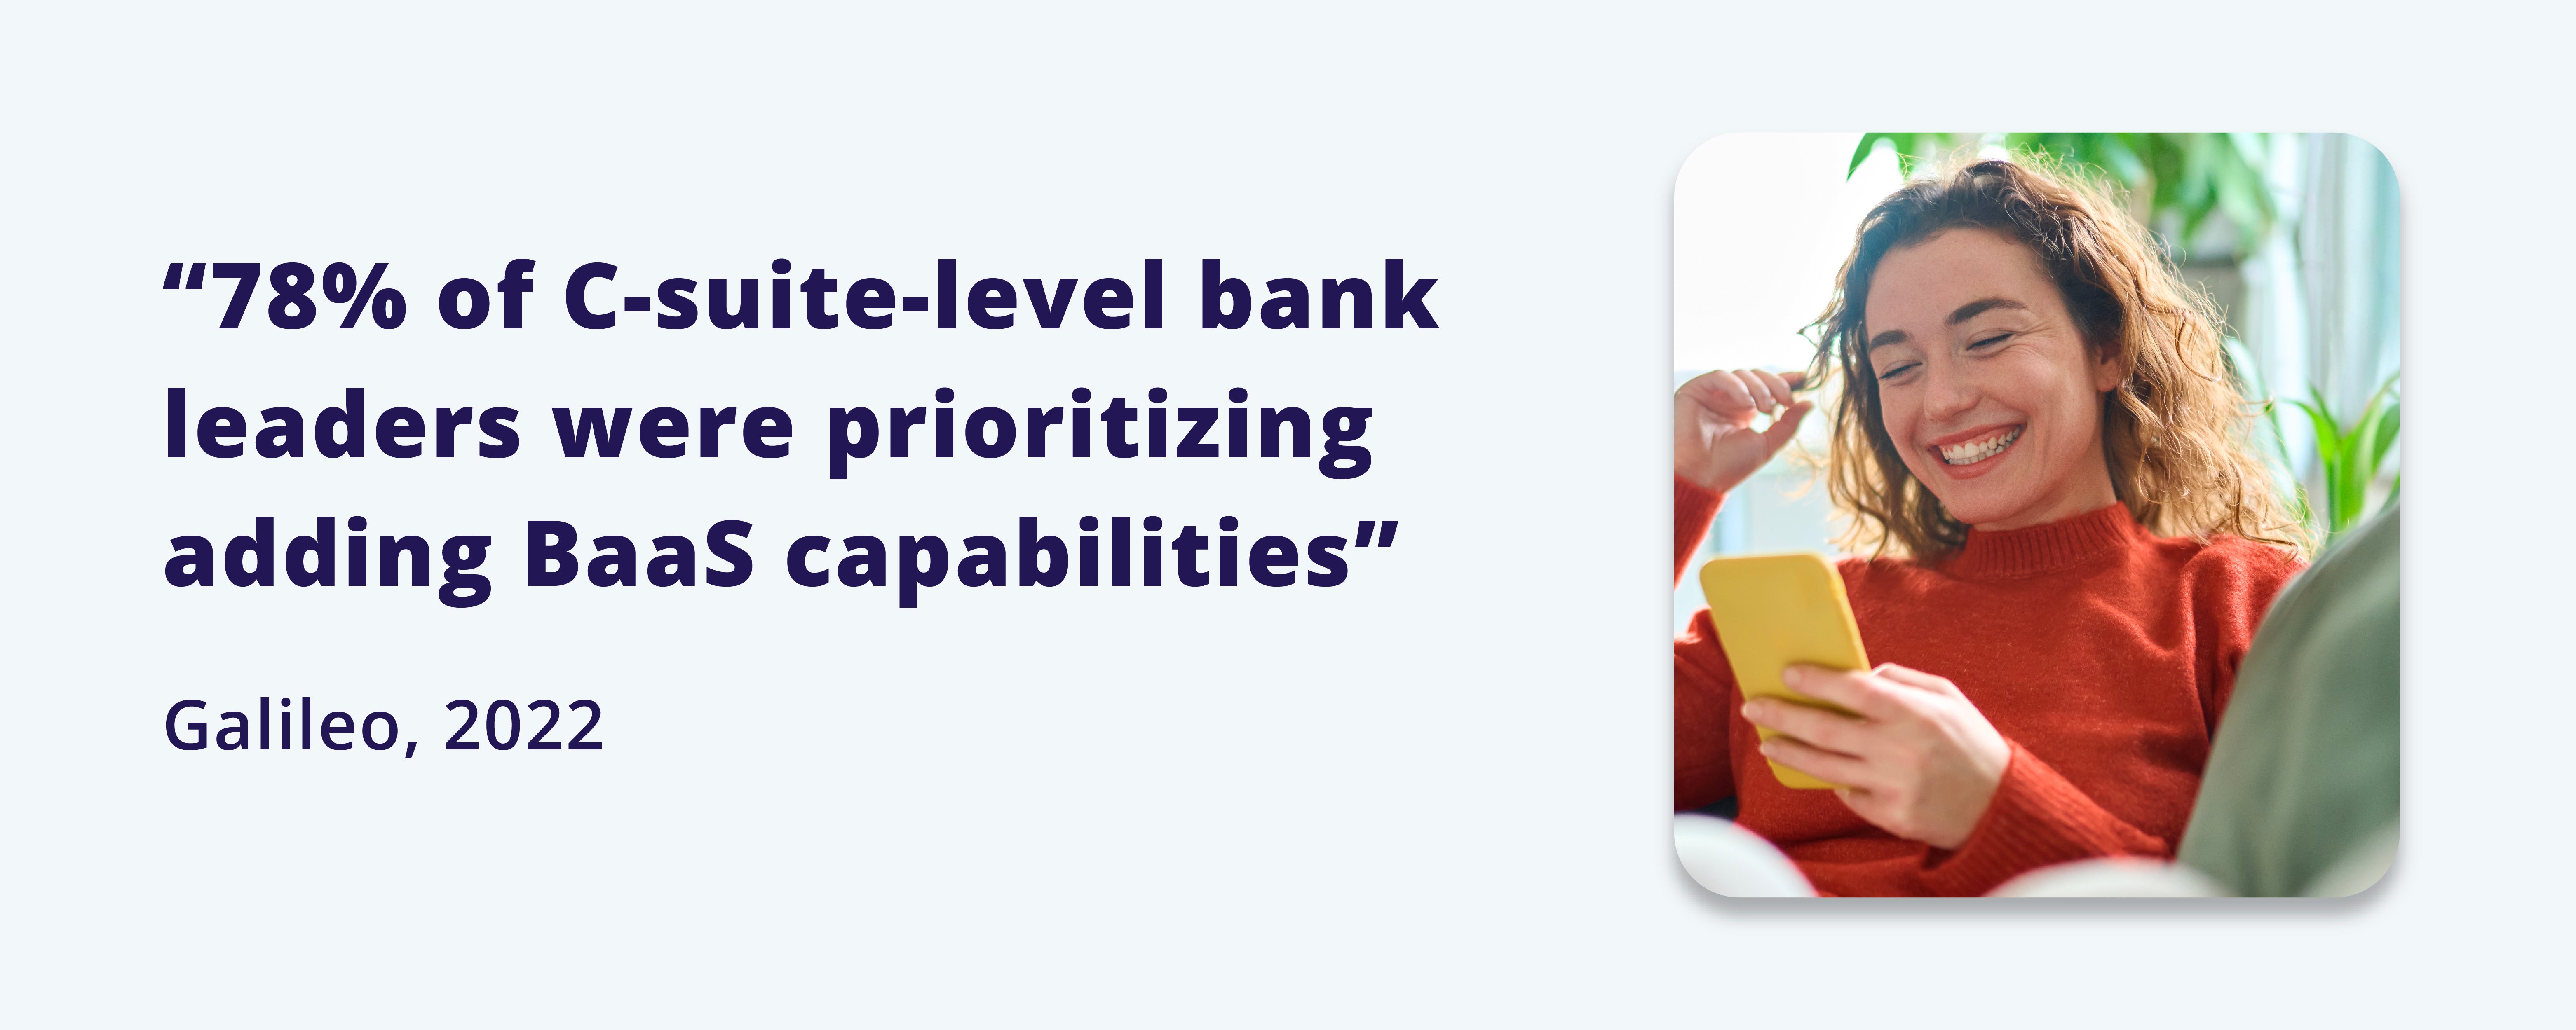 Banking-as-a-service is a priority for 78% of c-level bank leaders